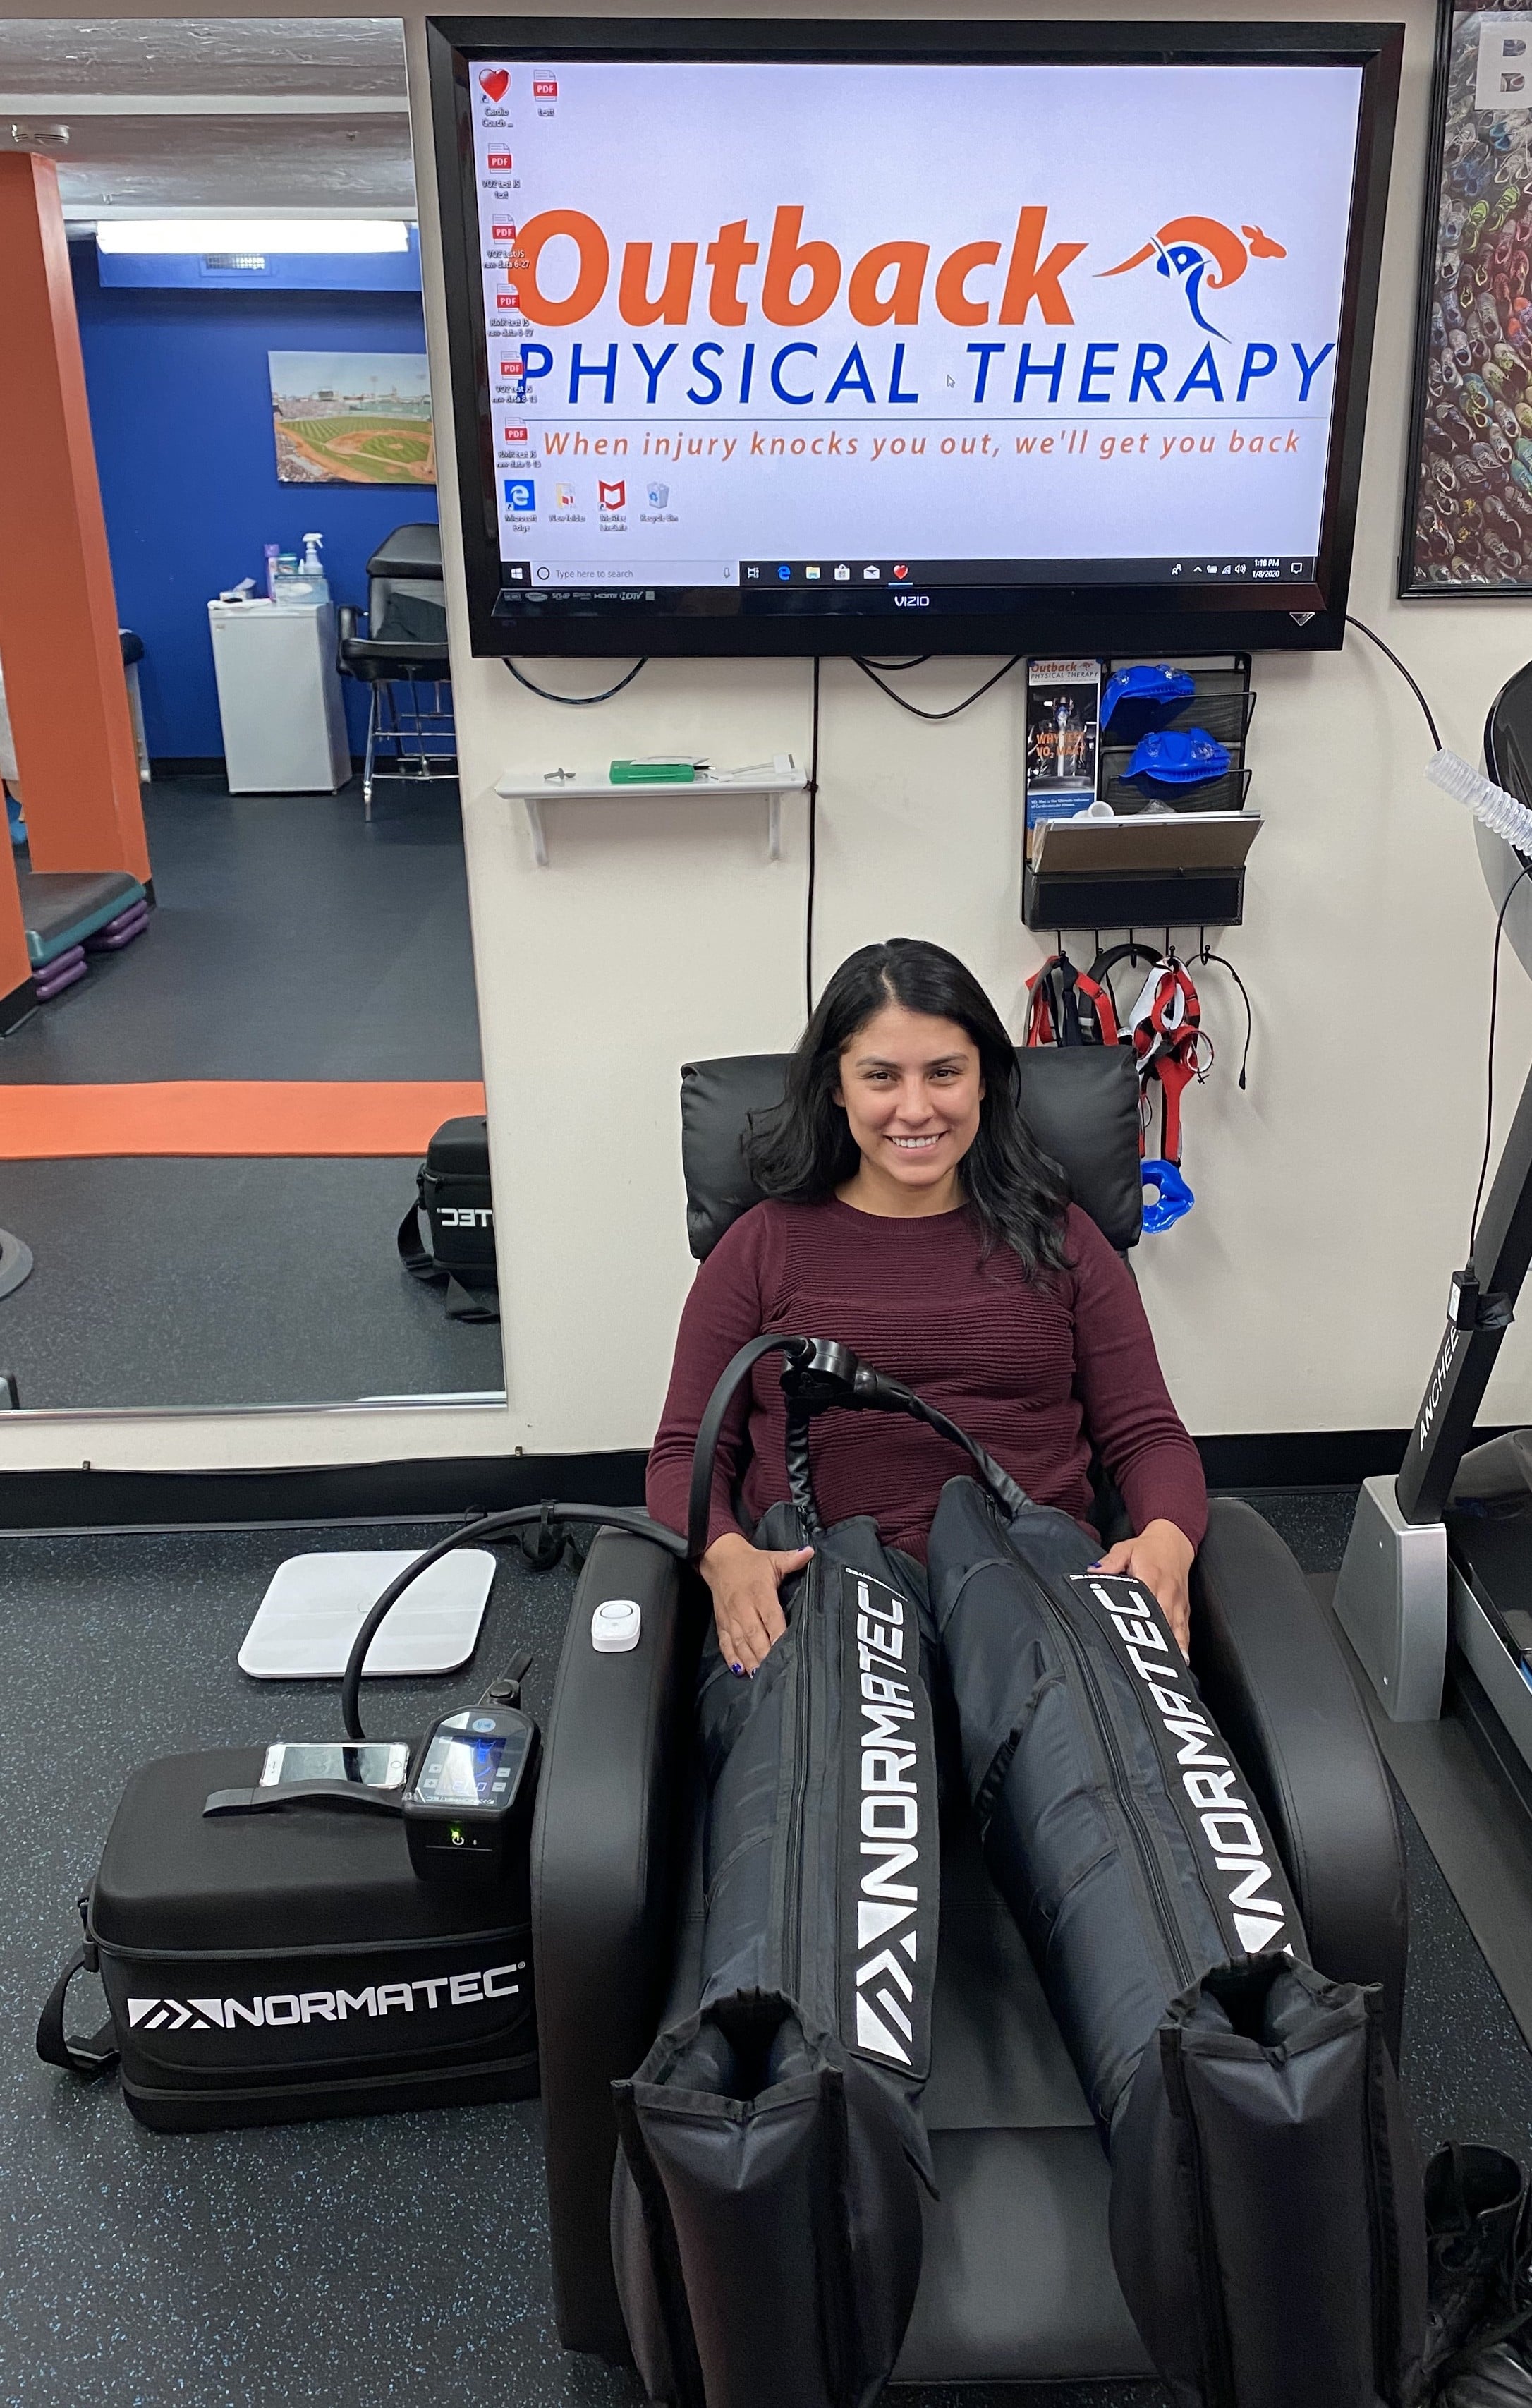 NormaTec Recovery boots at Outback Physical Therapy in Somerville, MA